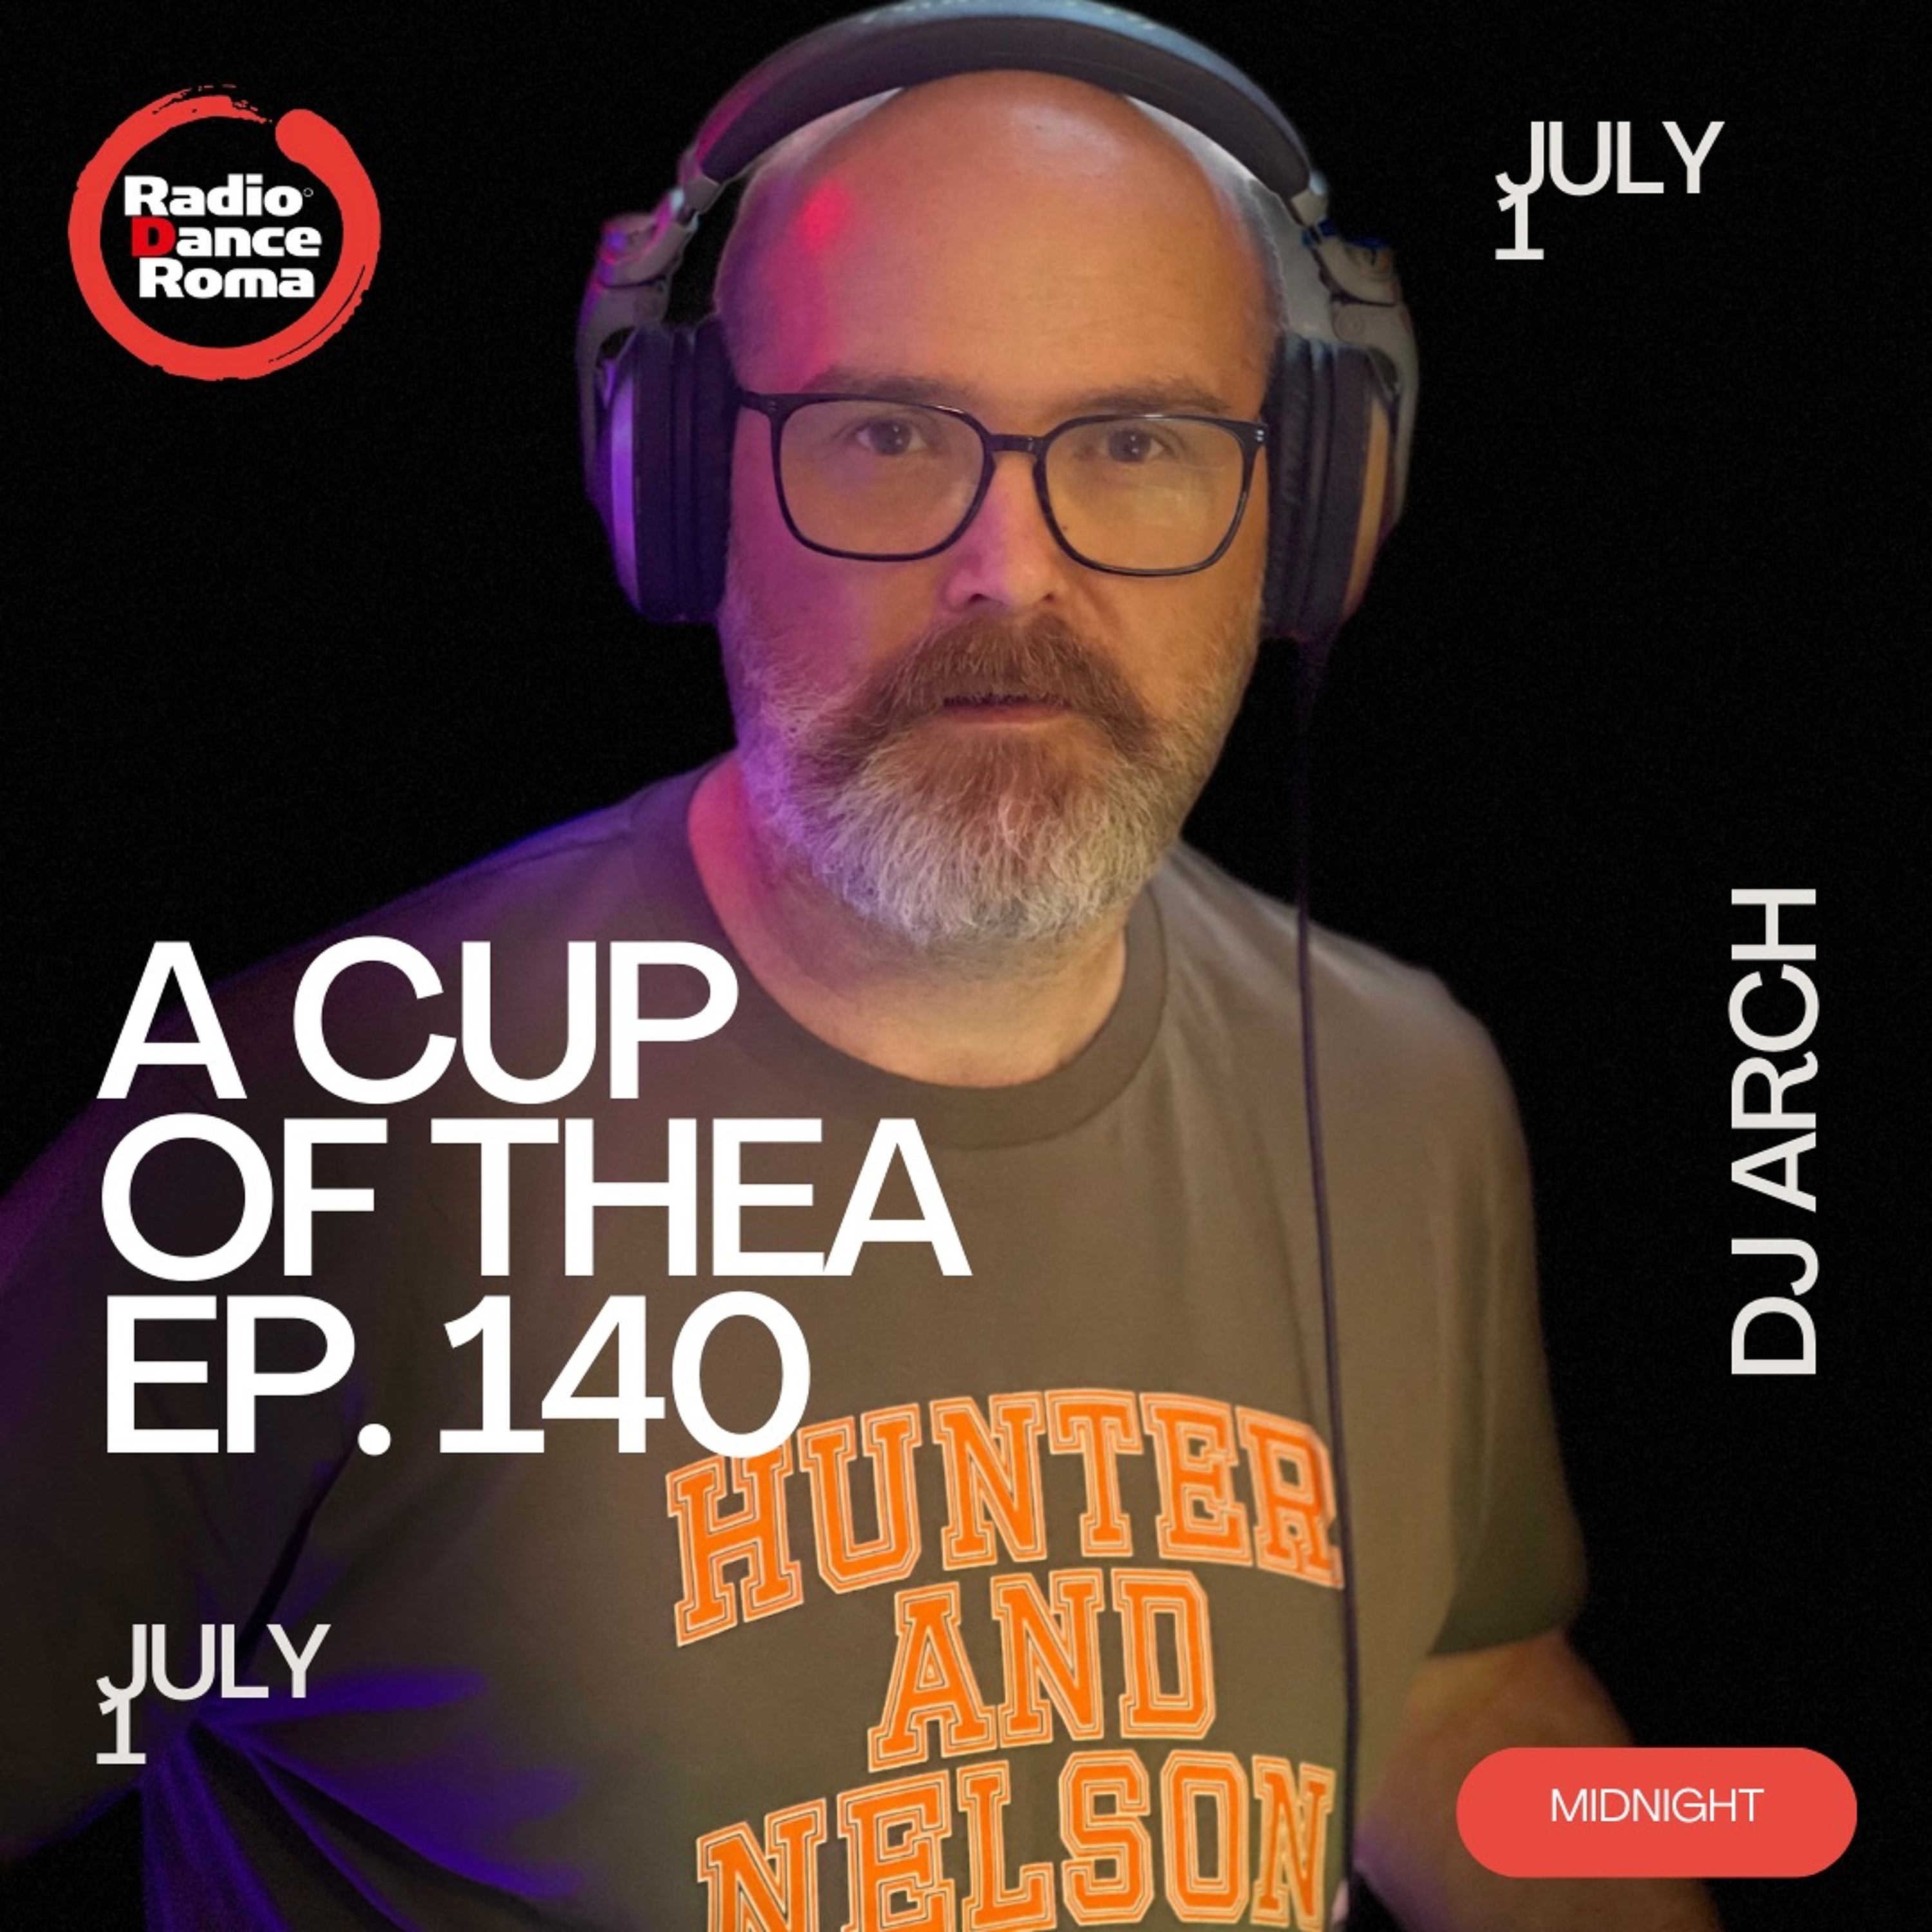 A Cup Of Thea Episode 140 With Dj Arch